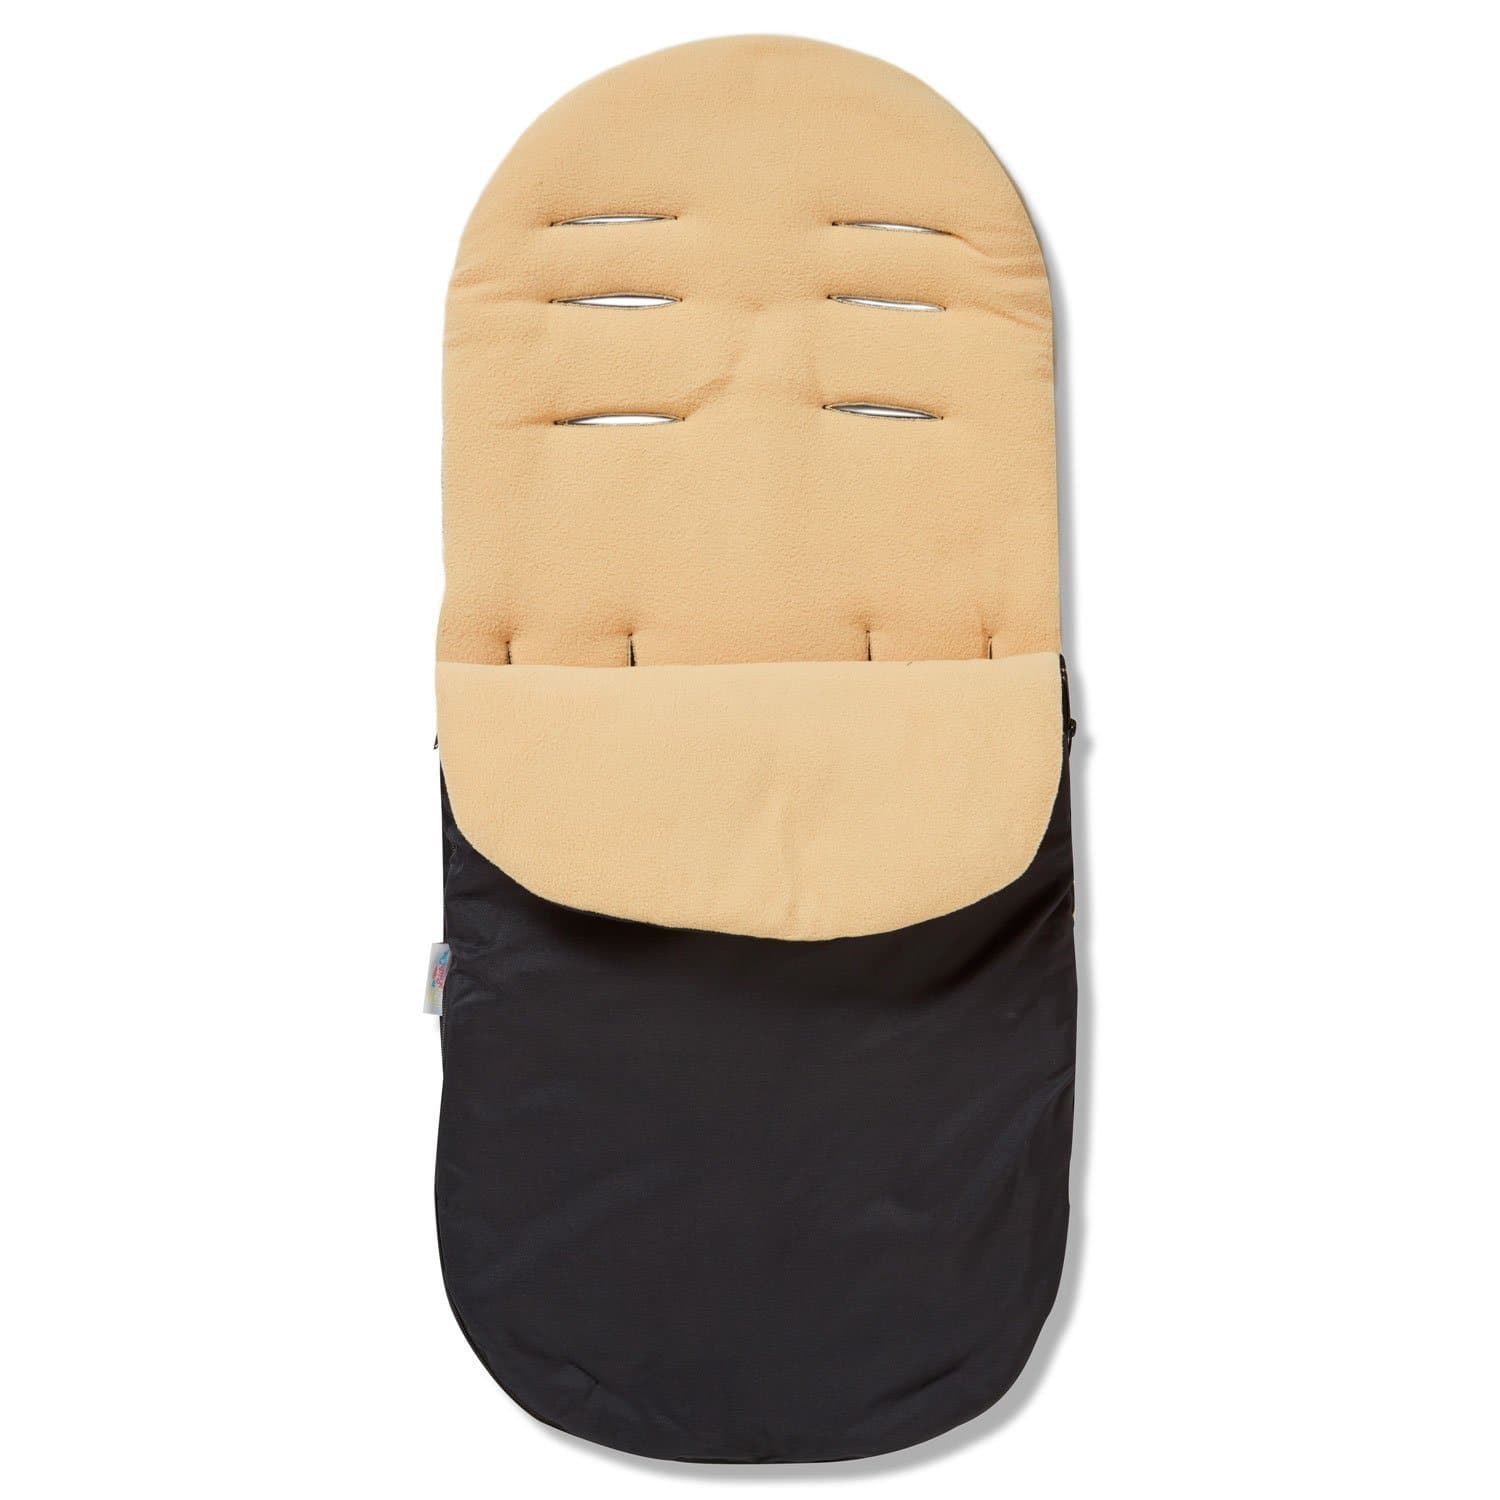 Footmuff / Cosy Toes Compatible with Kiddy - For Your Little One